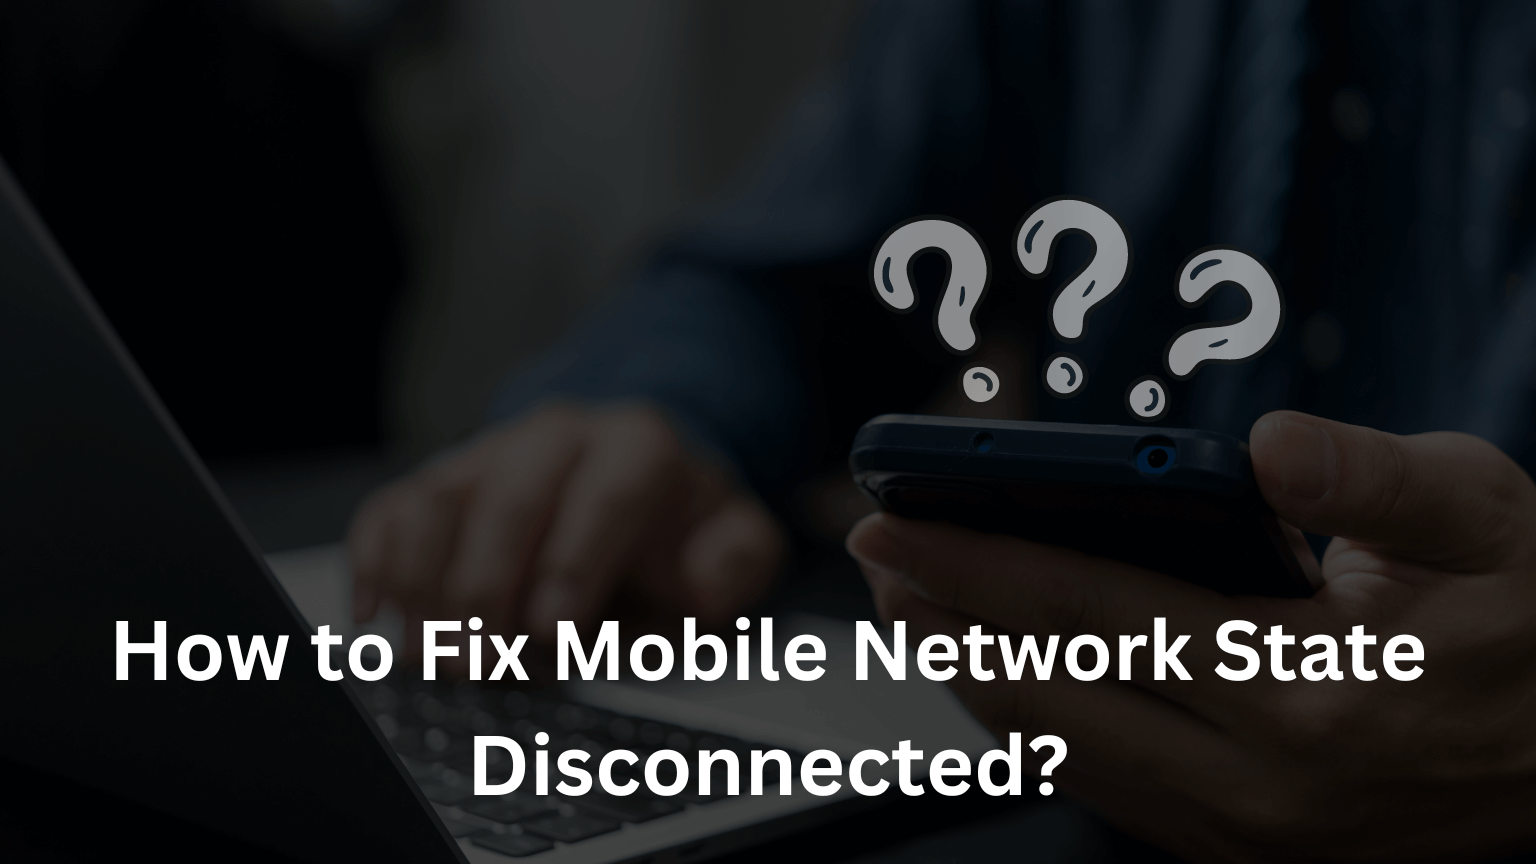 How to Fix Mobile Network State Disconnected?